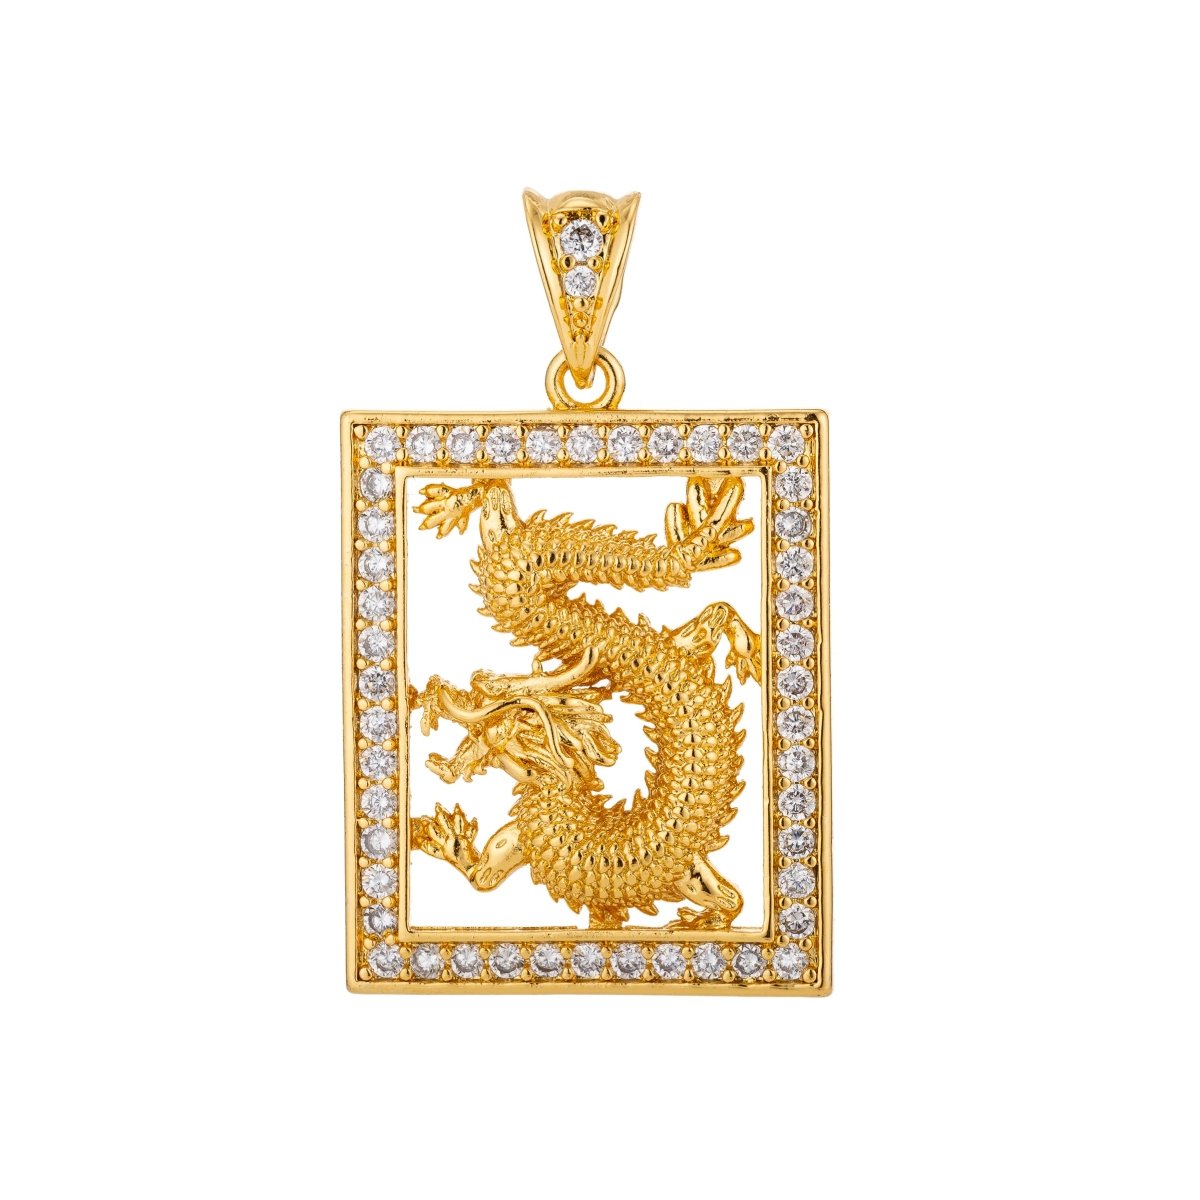 24K 18K Gold Filled or Rose Gold Majestic Dragon Charm Pendant with Bails Magical Creature Fairy Tale Cubic Zirconia Necklace for Jewelry Making H-802 - DLUXCA